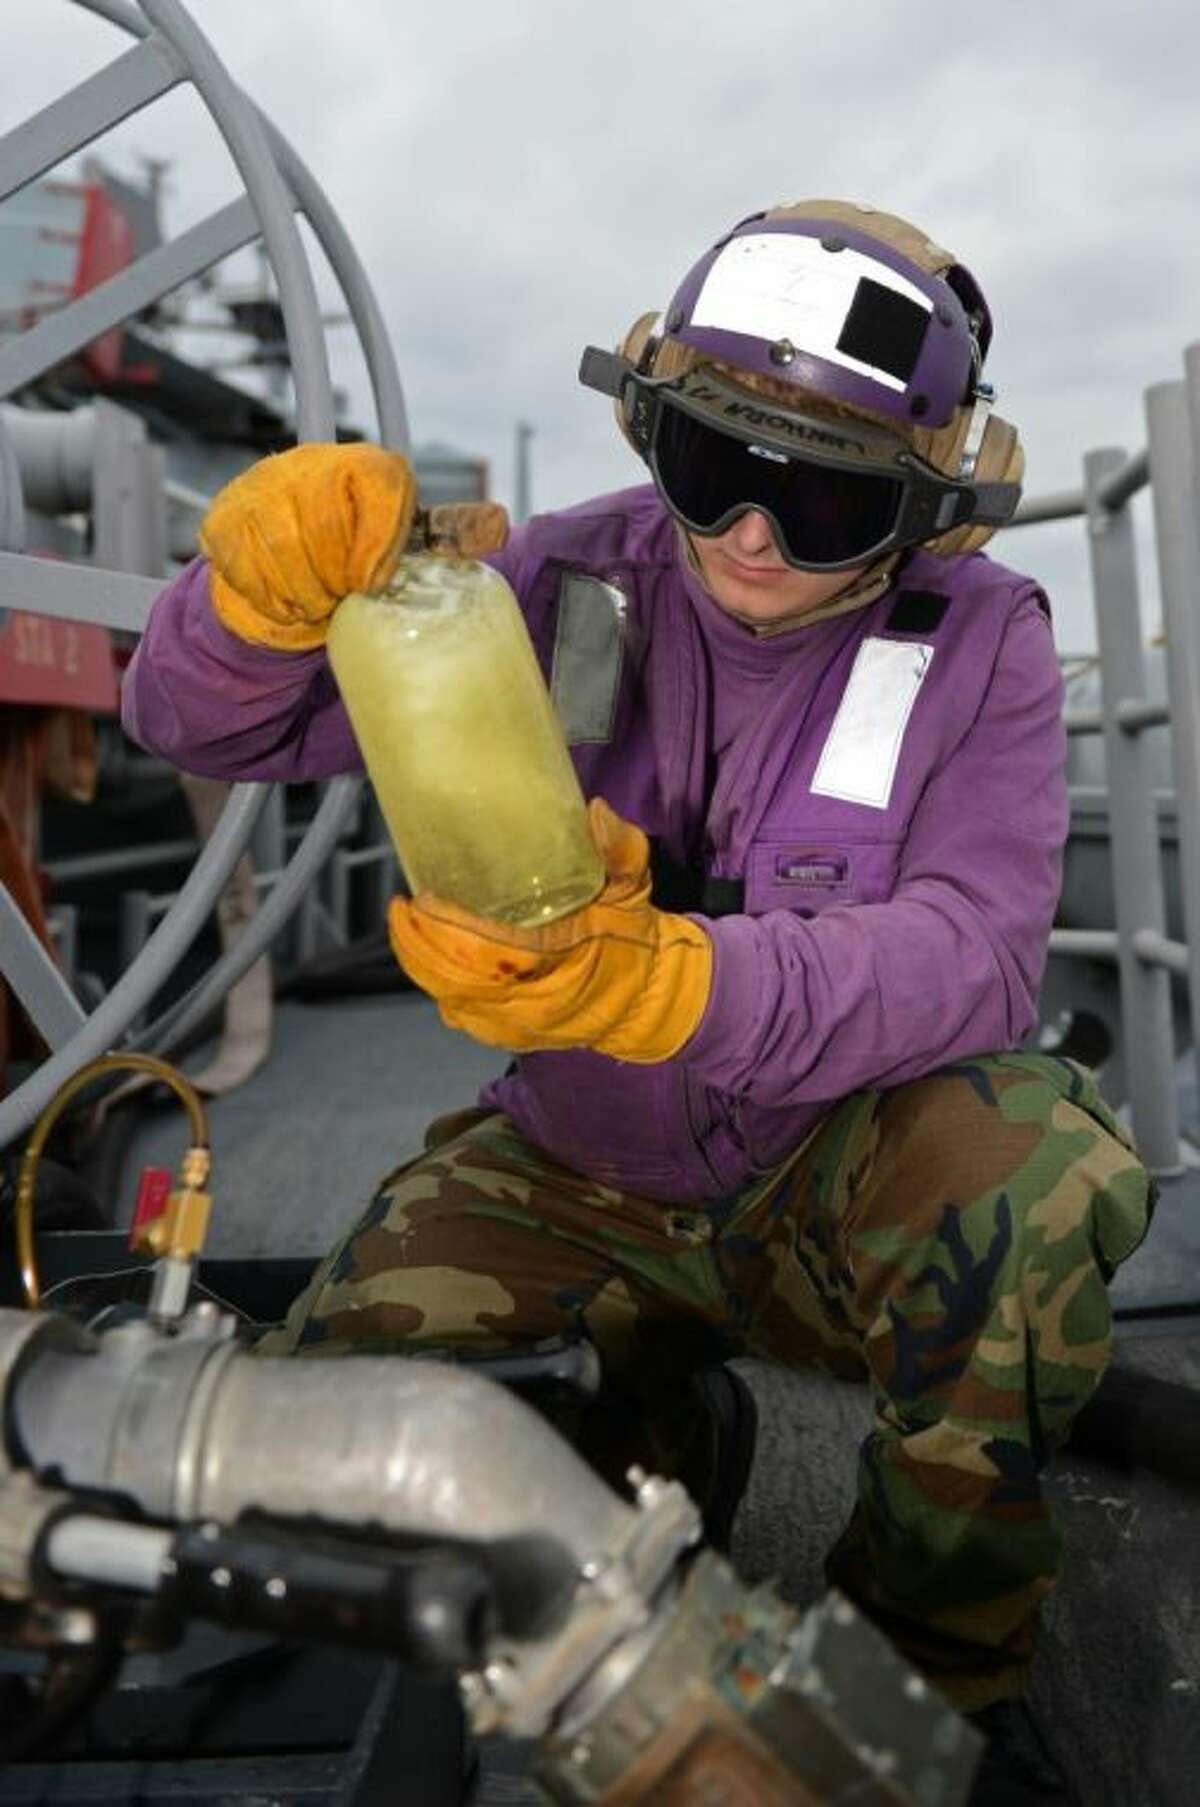 Aviation Boatswain’s Mate (Fuels) Airman Dylan Nunez, from Conroe, conducts a fuel clarity and brightness test with flushed JP 5 fuel March 3 somewhere in the East China Sea aboard the forward-deployed amphibious assault ship USS Bonhomme Richard (LHD 6). The Bonhomme Richard is the flagship of the Bonhomme Richard Amphibious Ready Group, and with the embarked 31st MEU, is currently conducting joint force operations in the U.S. 7th Fleet Area of Responsibility.